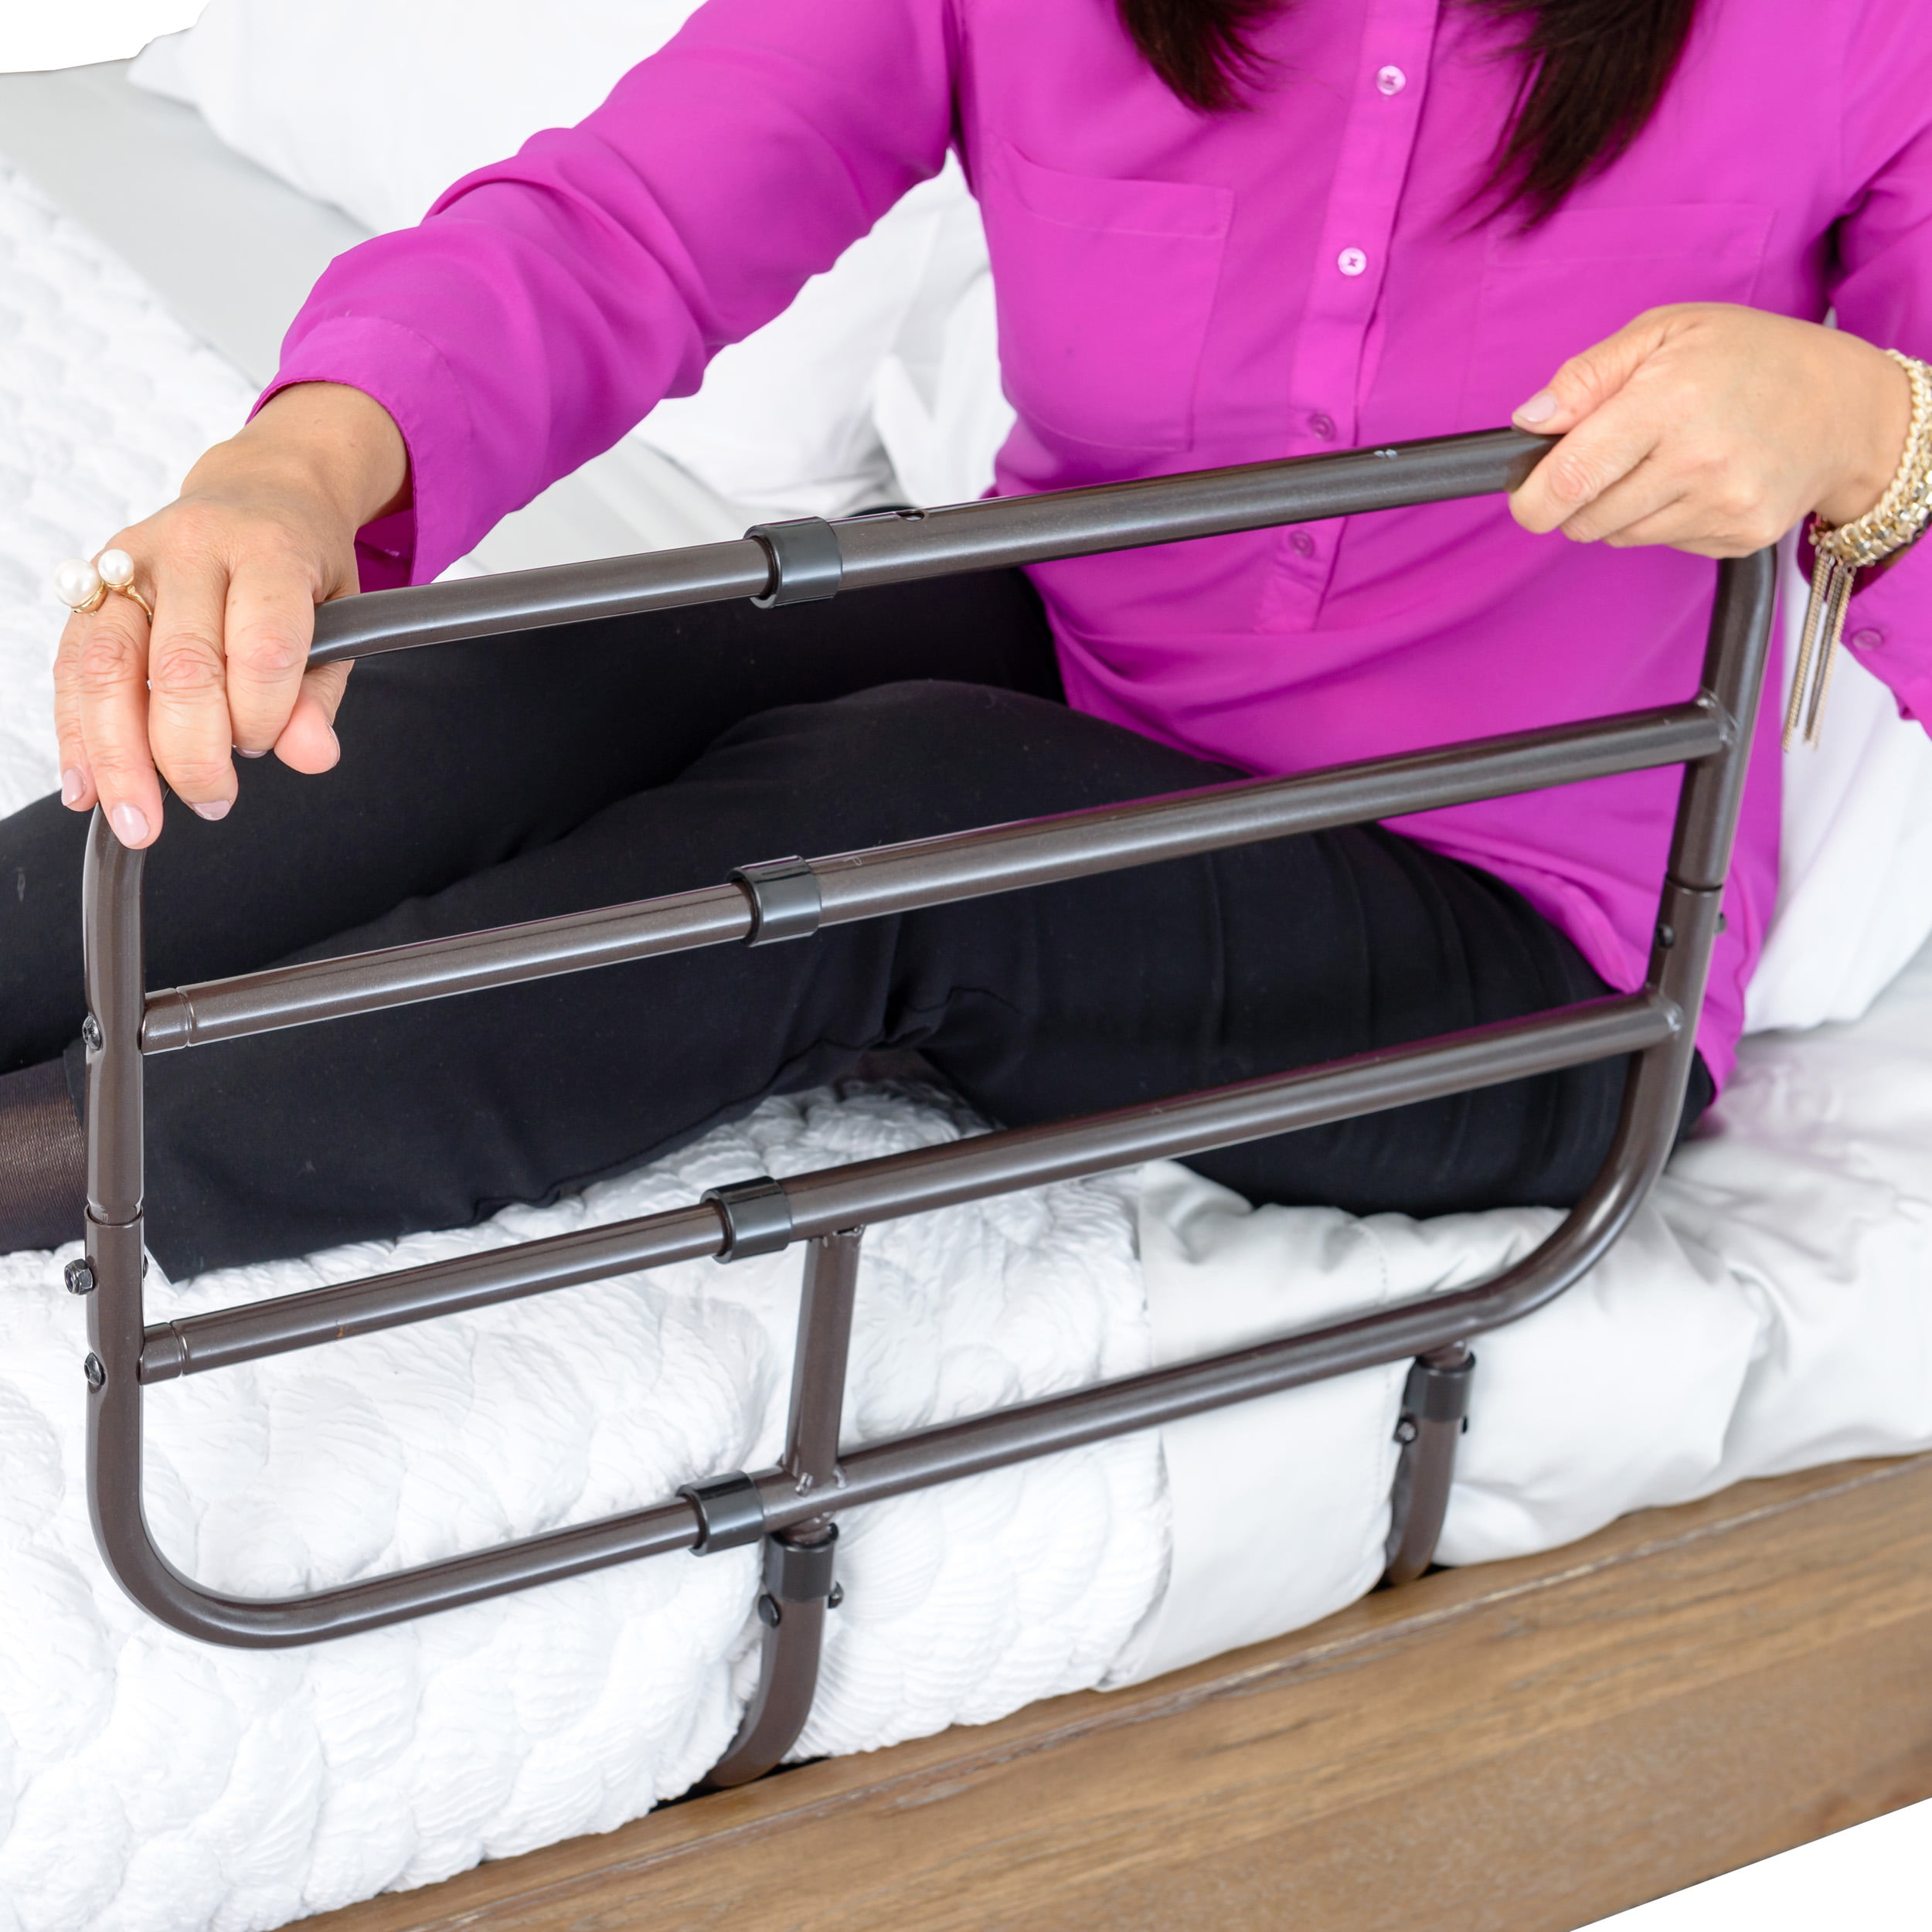 The Best Adjustable Beds For Seniors - The Sleep Judge